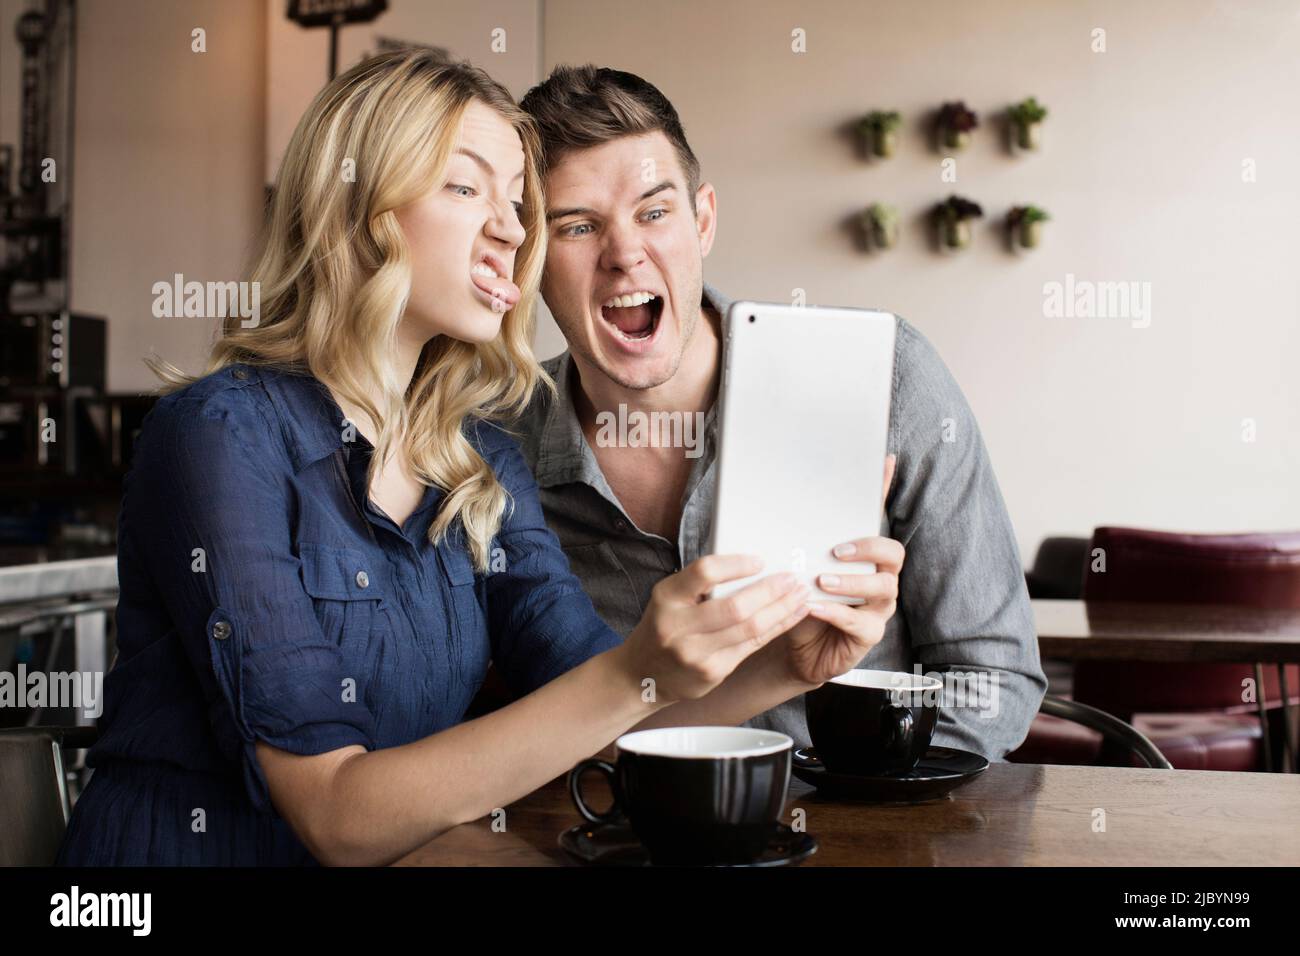 Caucasian couple using digital tablet together Stock Photo